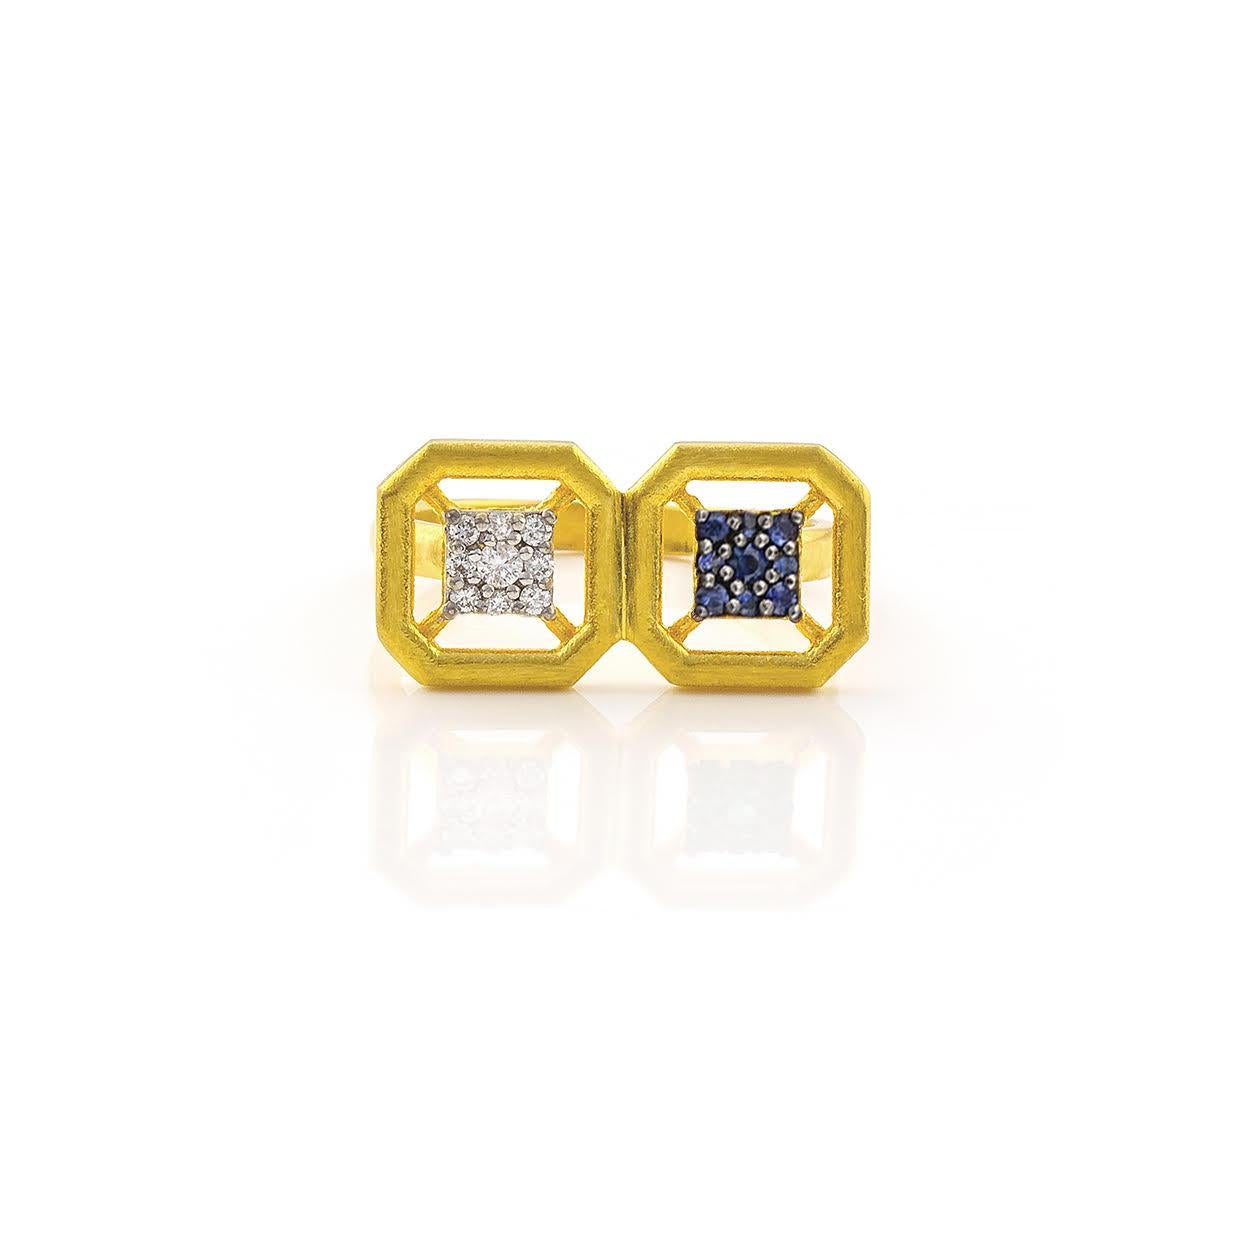 100% recycled 14K Yellow Gold, plated with 22K Gold

Diamond

Blue Sapphire

Size: on order

Ancient Gold Jewelry collection inspired by the antiquity, for young women and men, called Apollonian.

Apollonian is

The beauty of youth
The antiquity
The